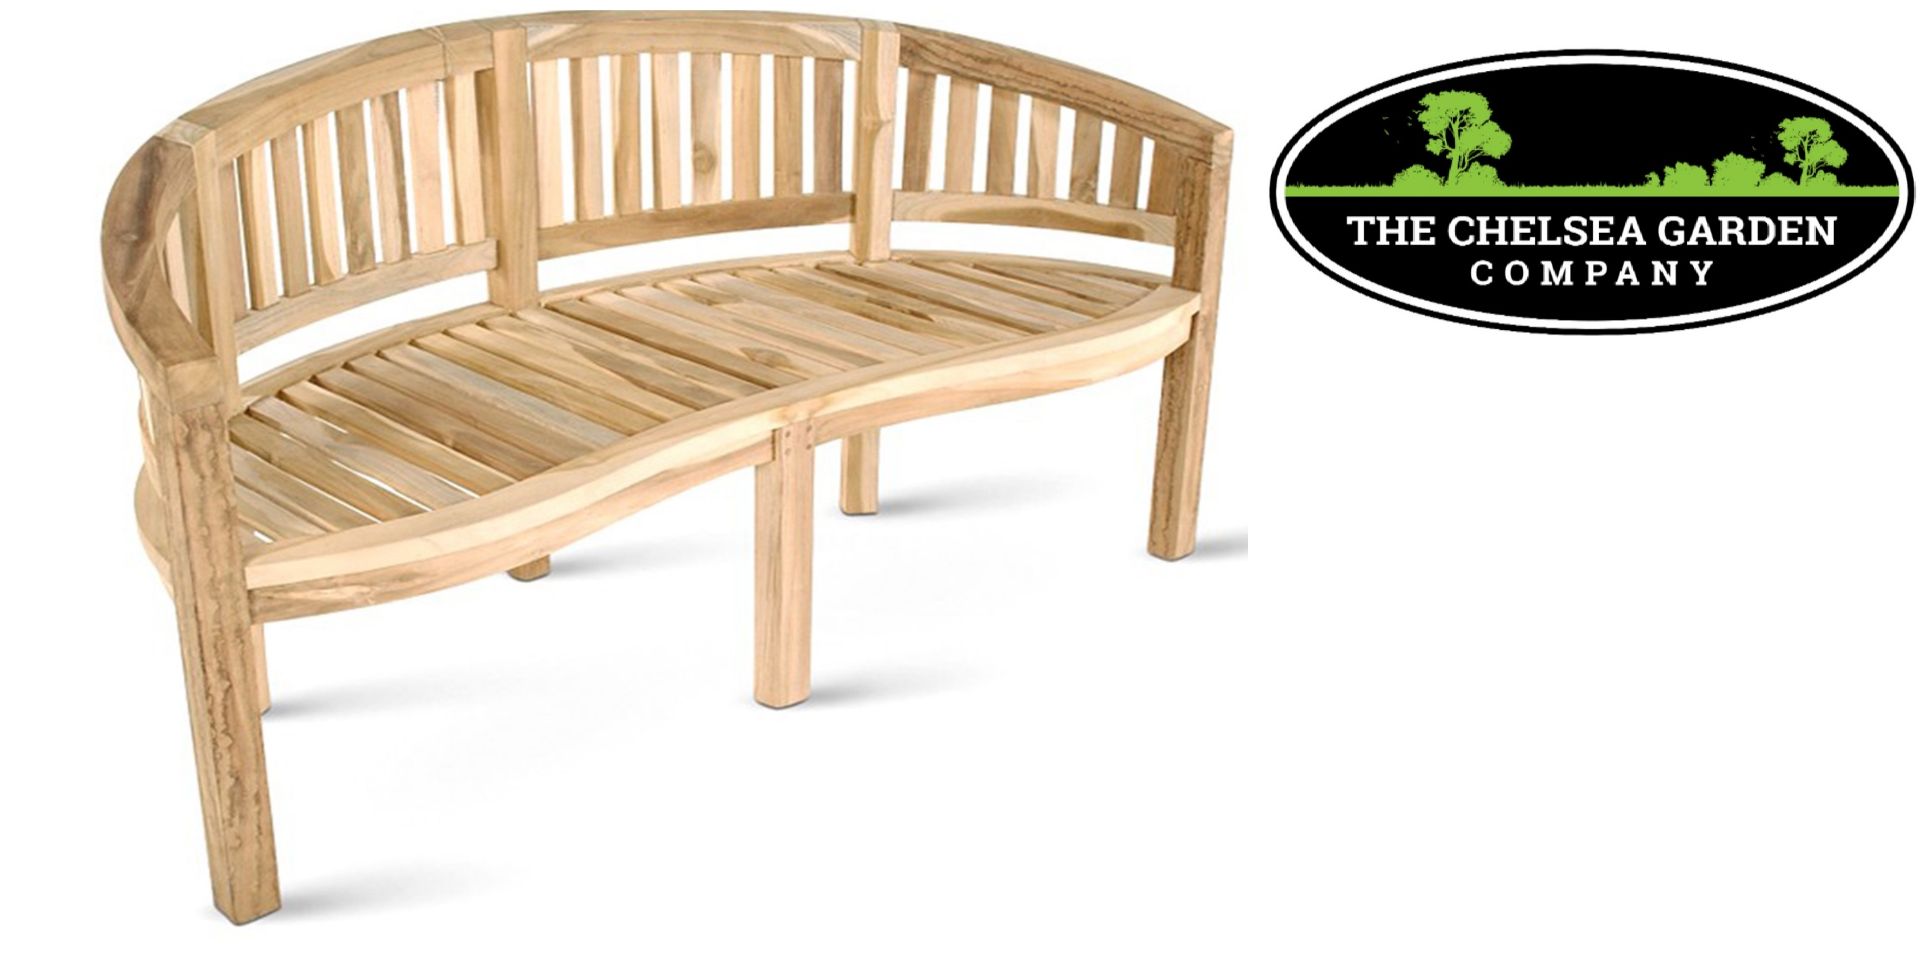 + VAT Brand New Chelsea Garden Company Banana Bench - Made From Solid Teak - Curved Top Rail And